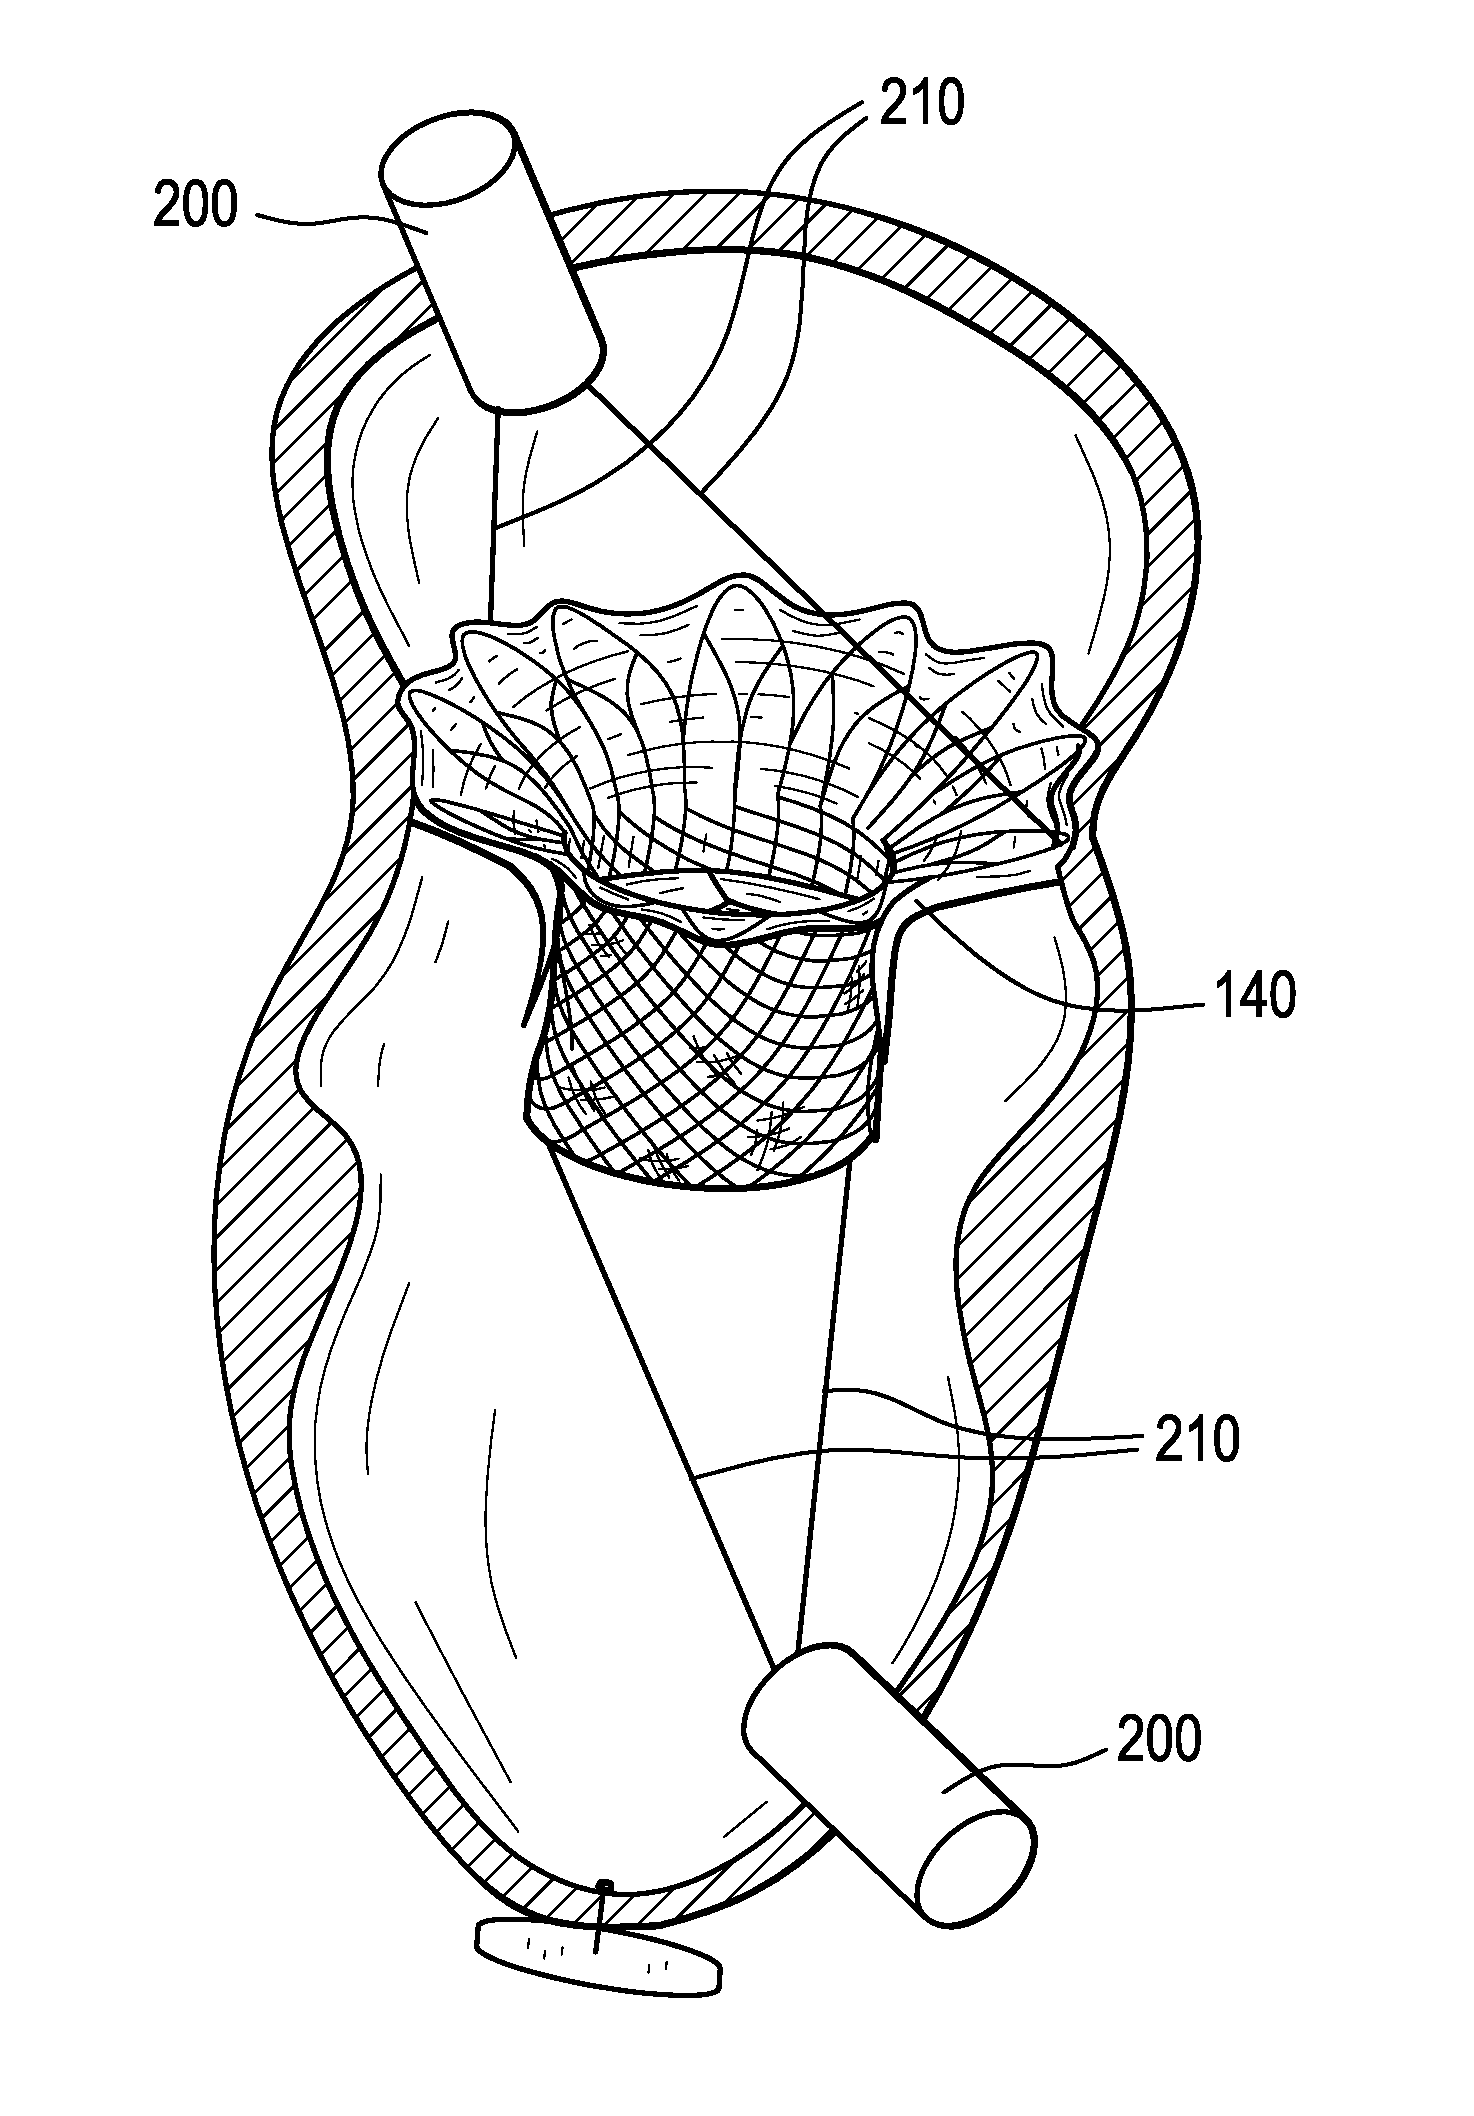 Tethers for Prosthetic Mitral Valve